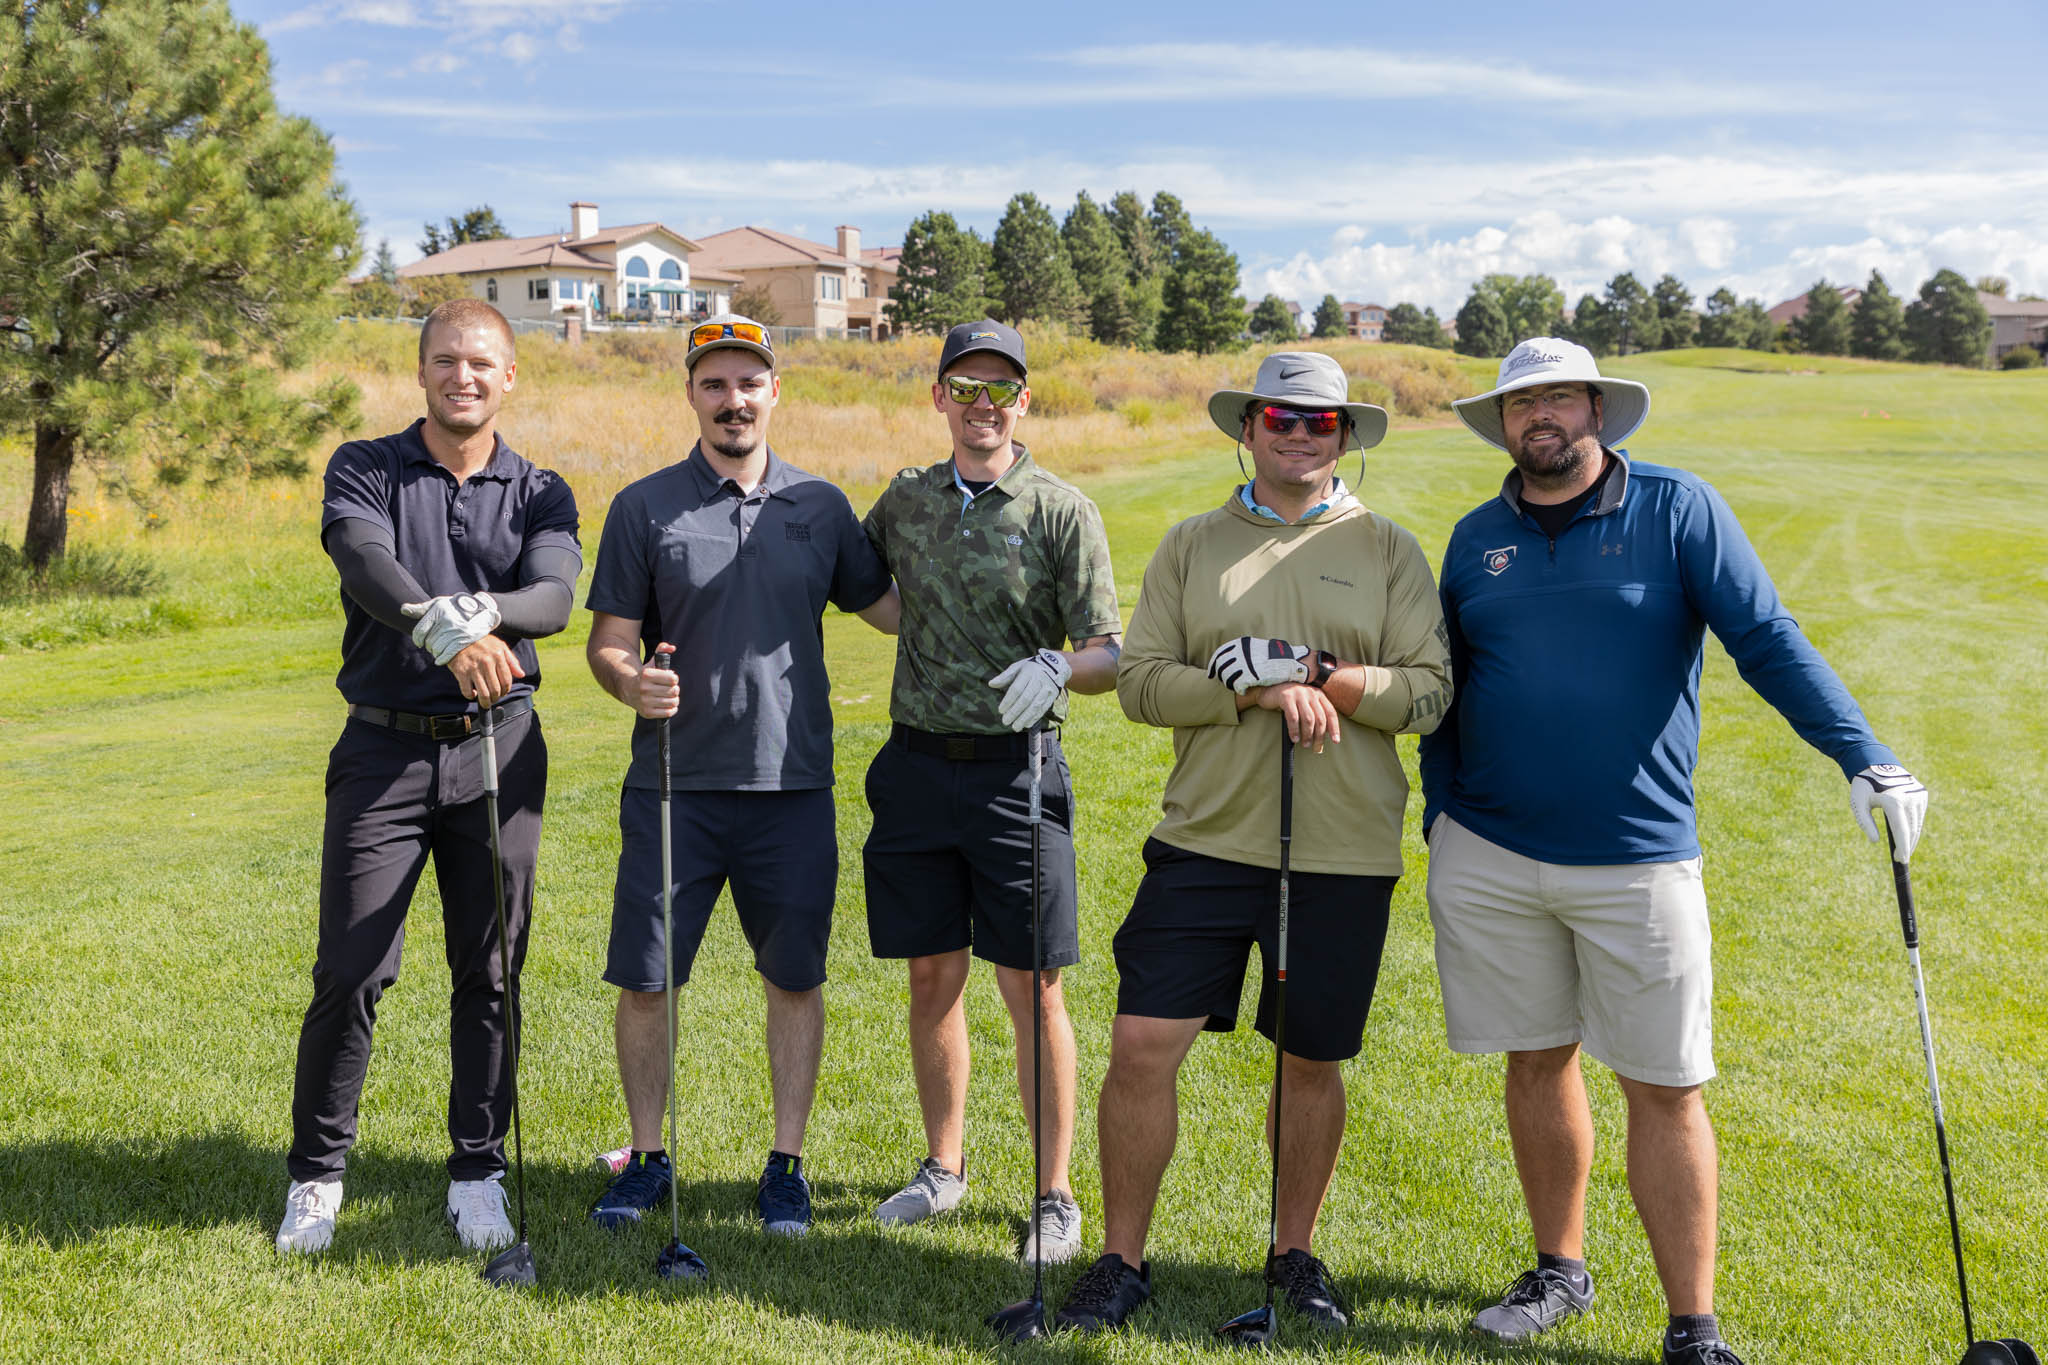 A group of men posing for a photo on a golf course.